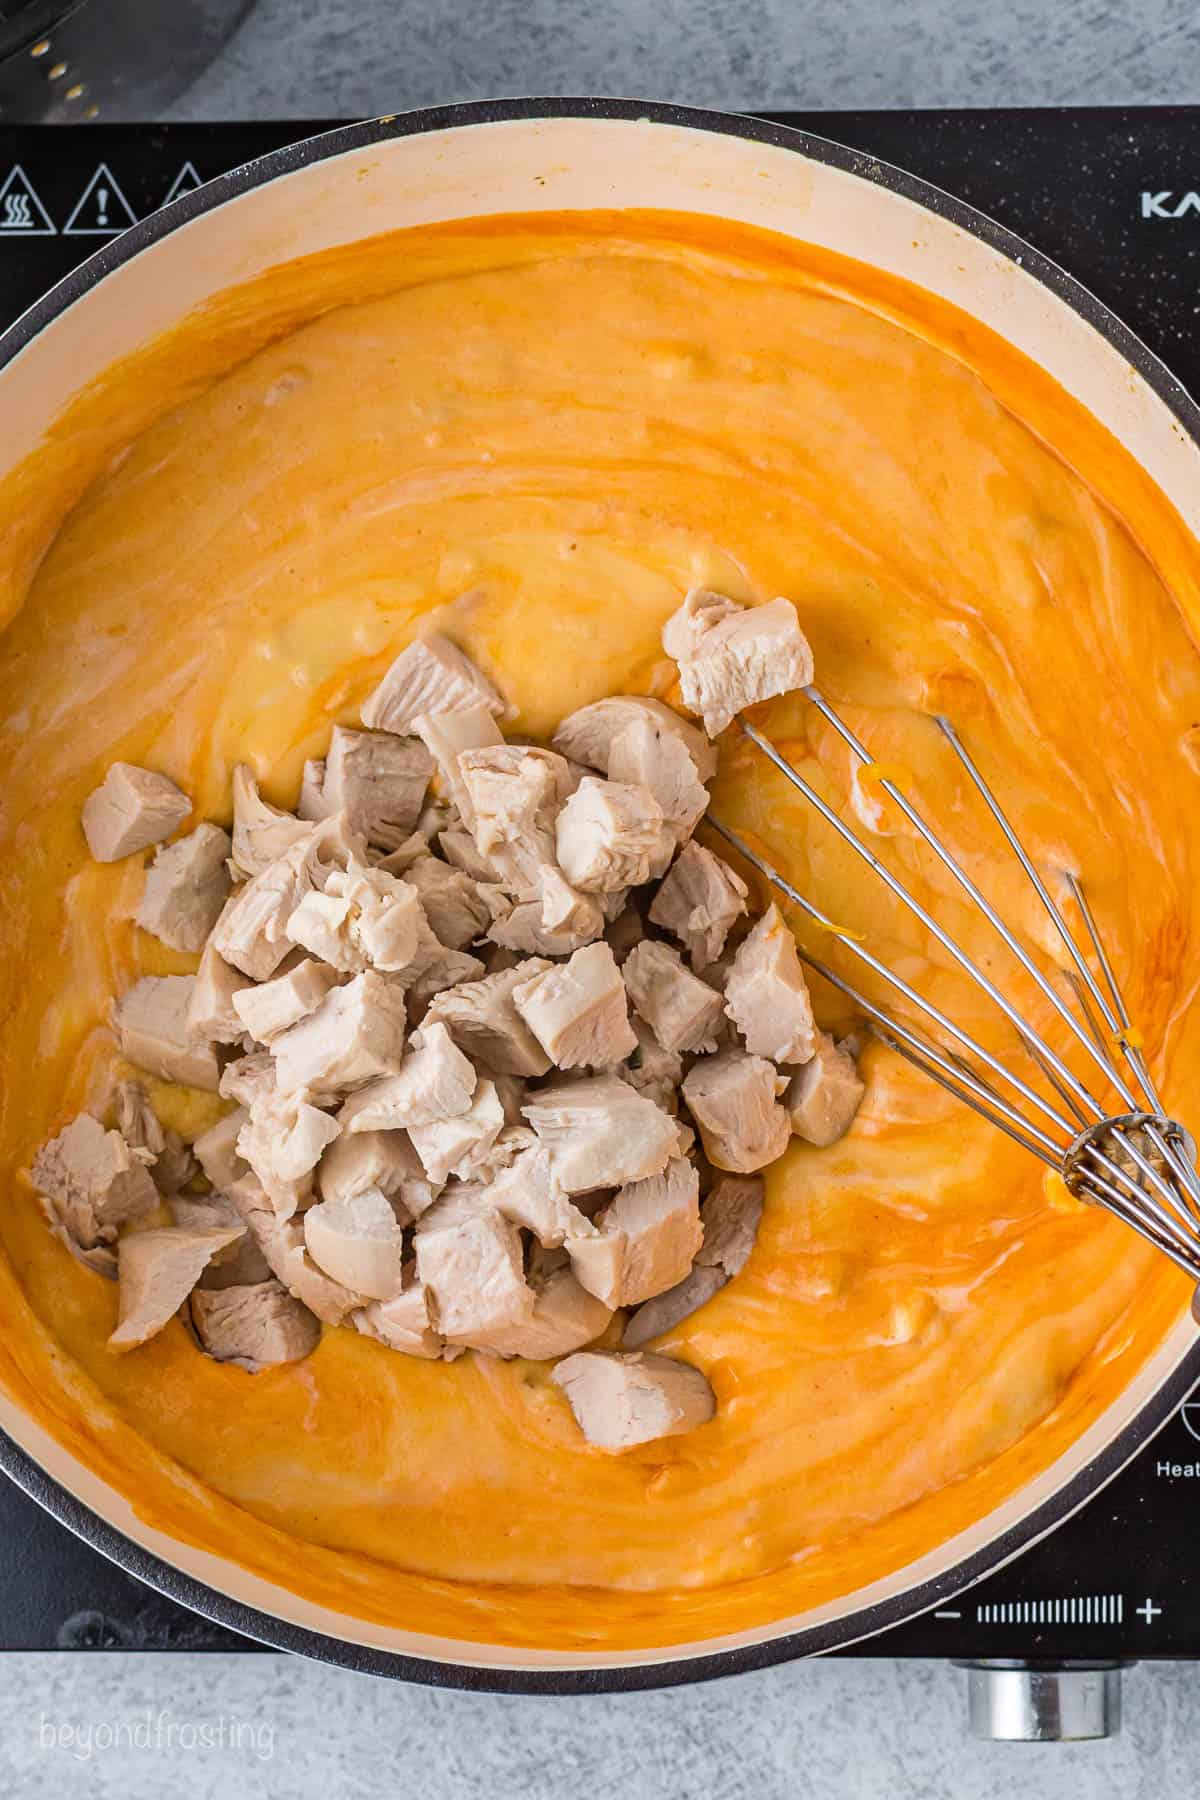 Chopped chicken being mixed into a saucepan full of cheesy buffalo sauce